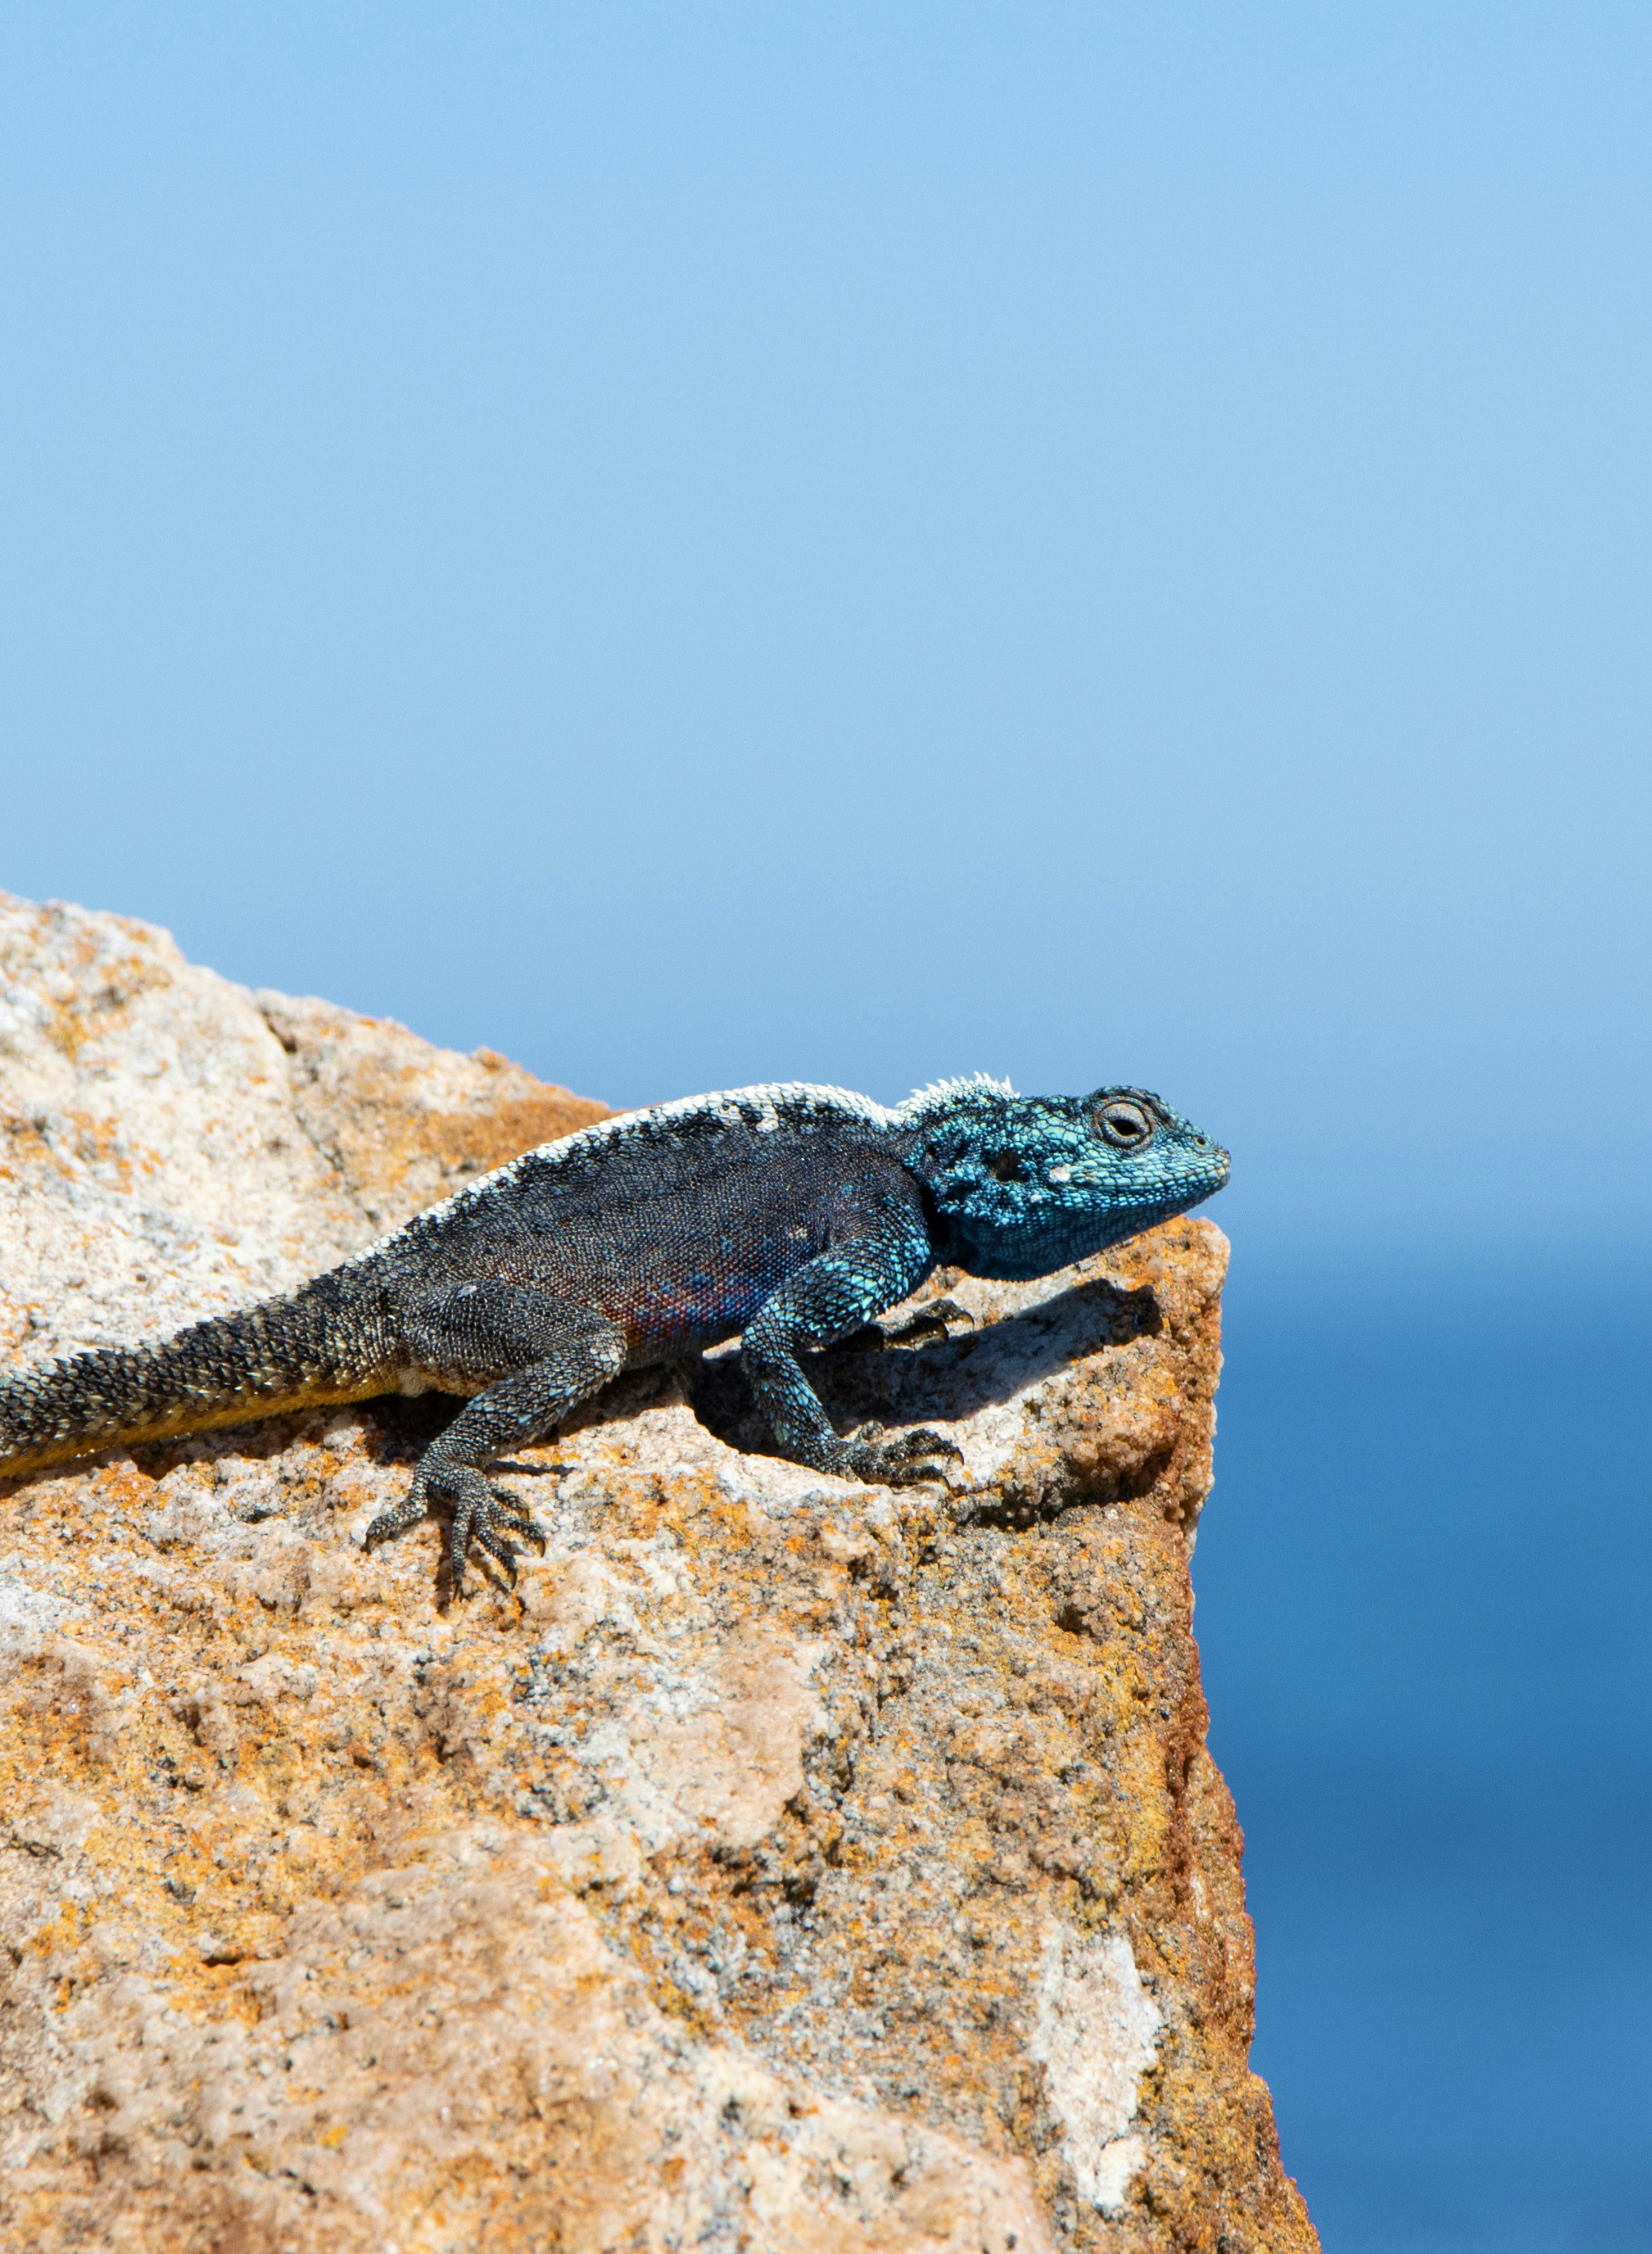 blue and black lizard on brown rock during daytime